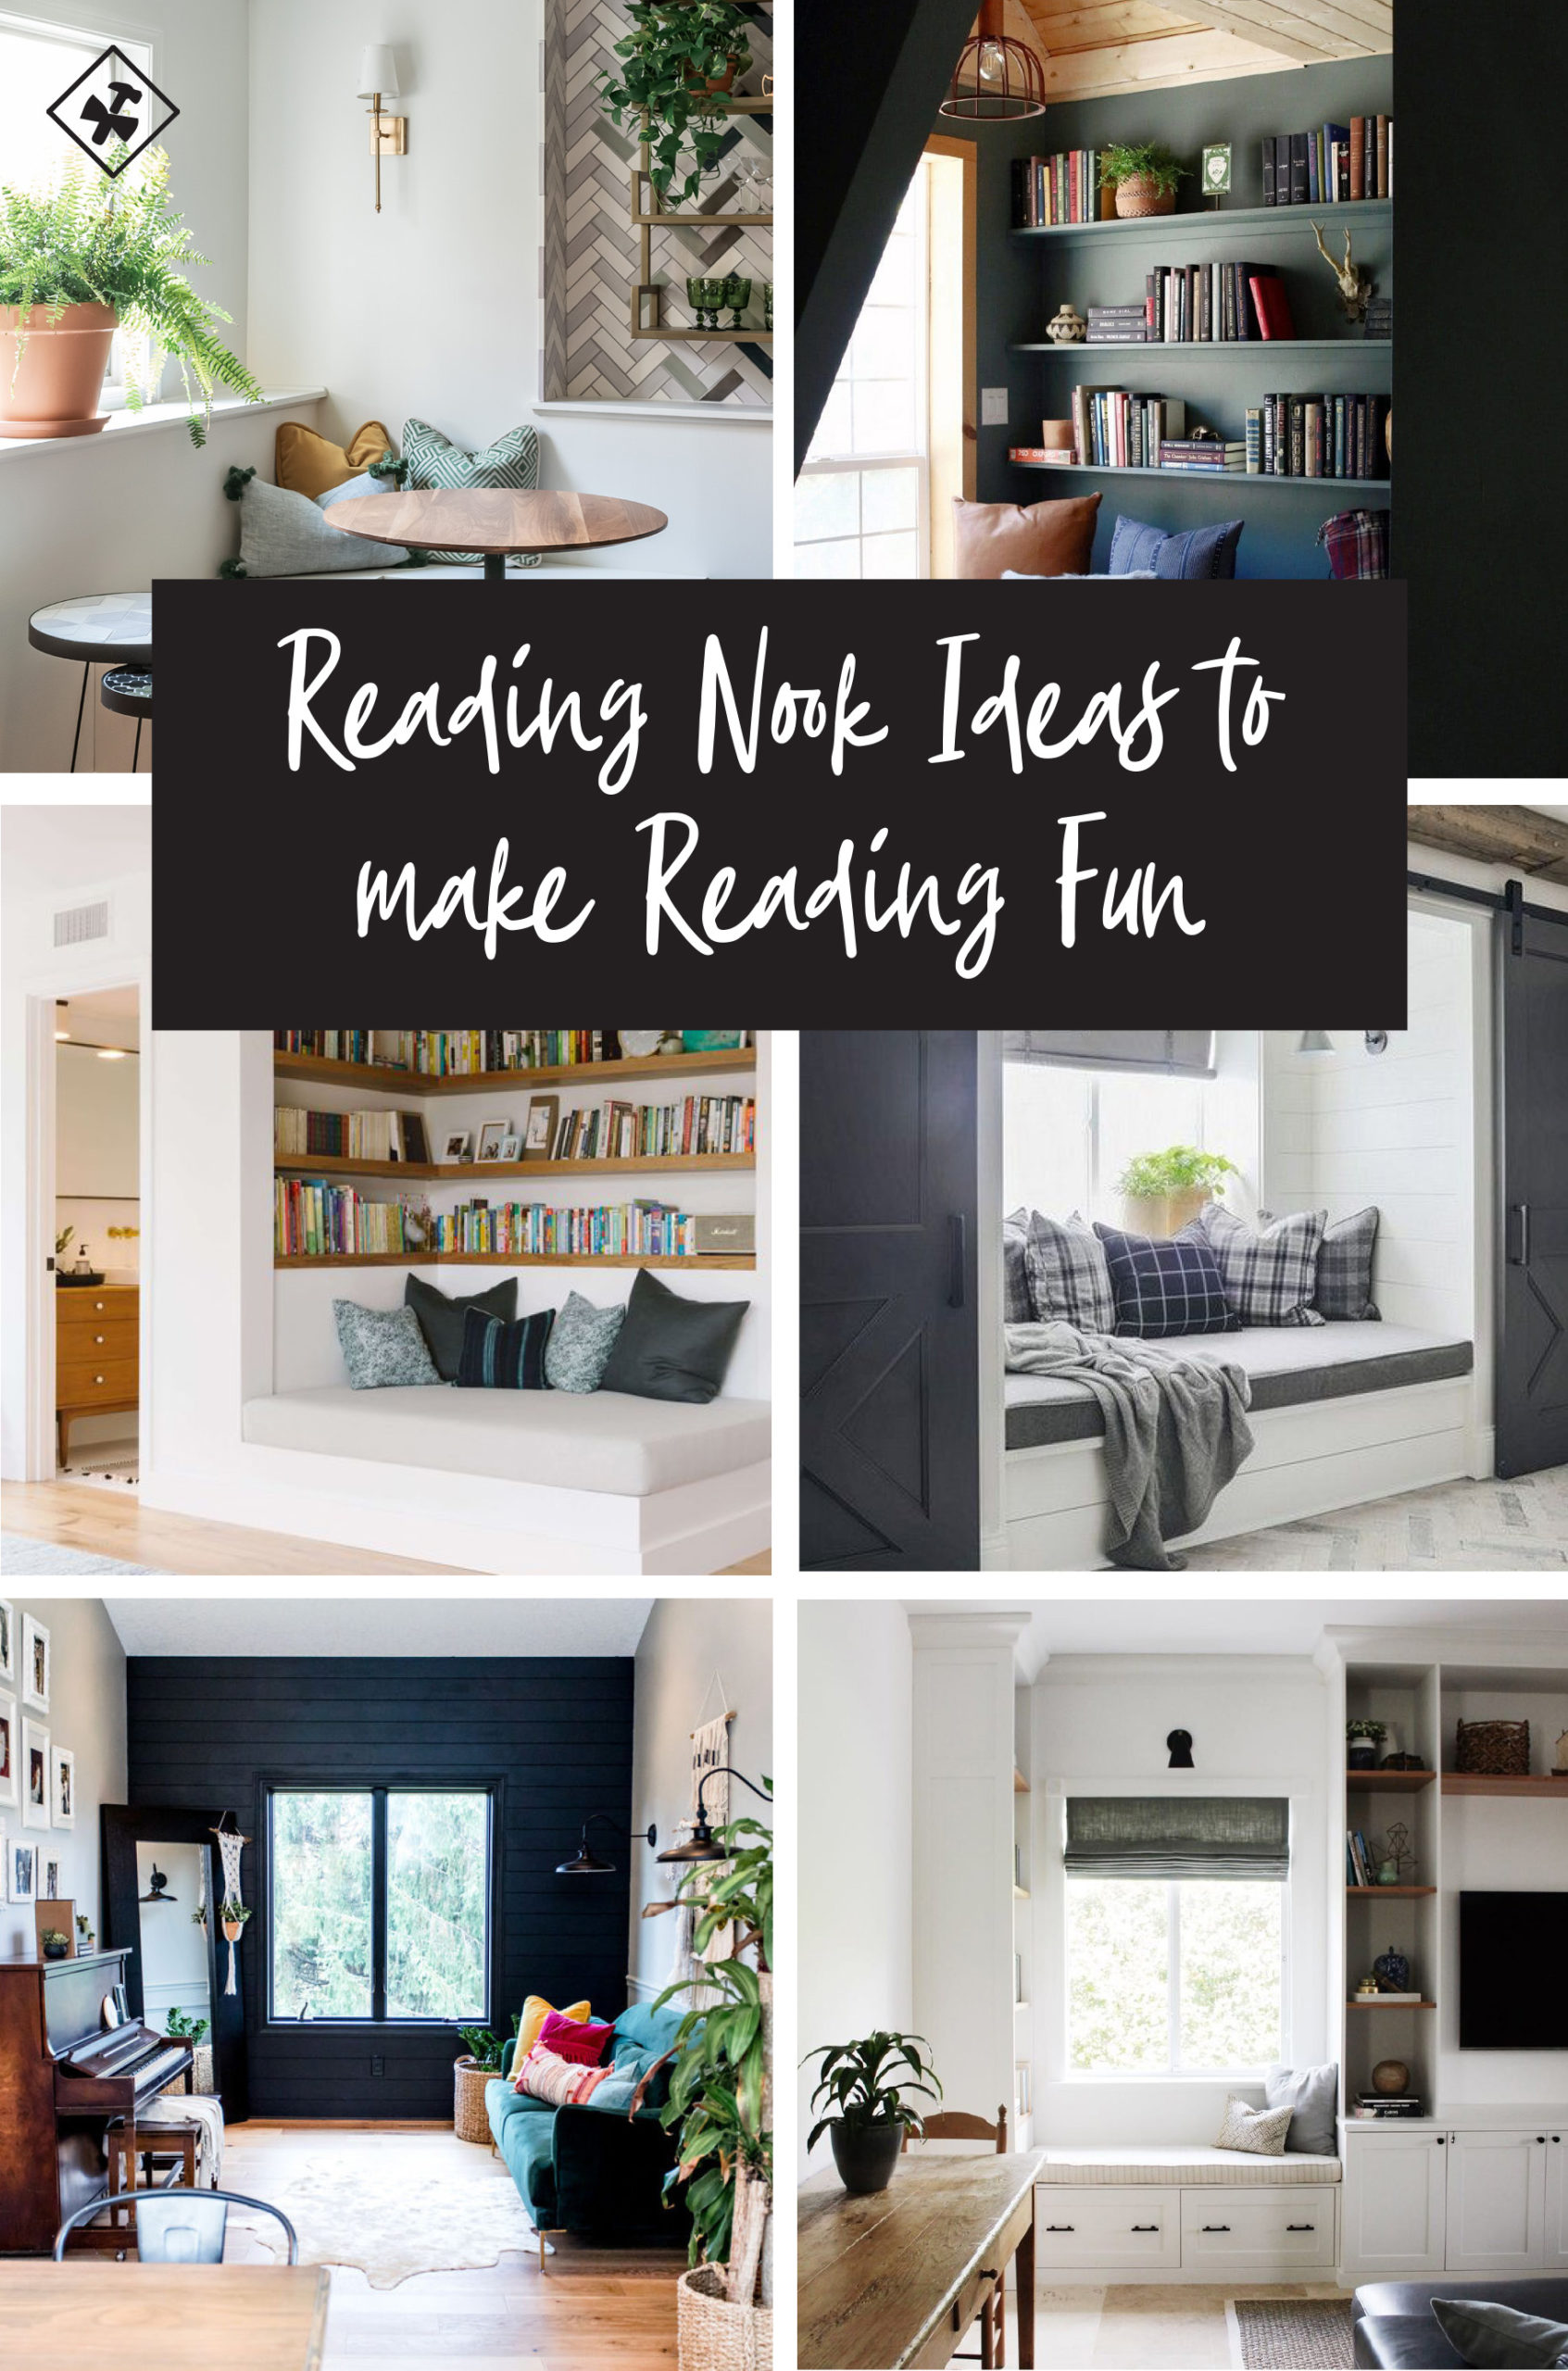 Reading Nook Ideas: Make Reading Fun for Everyone | construction2style